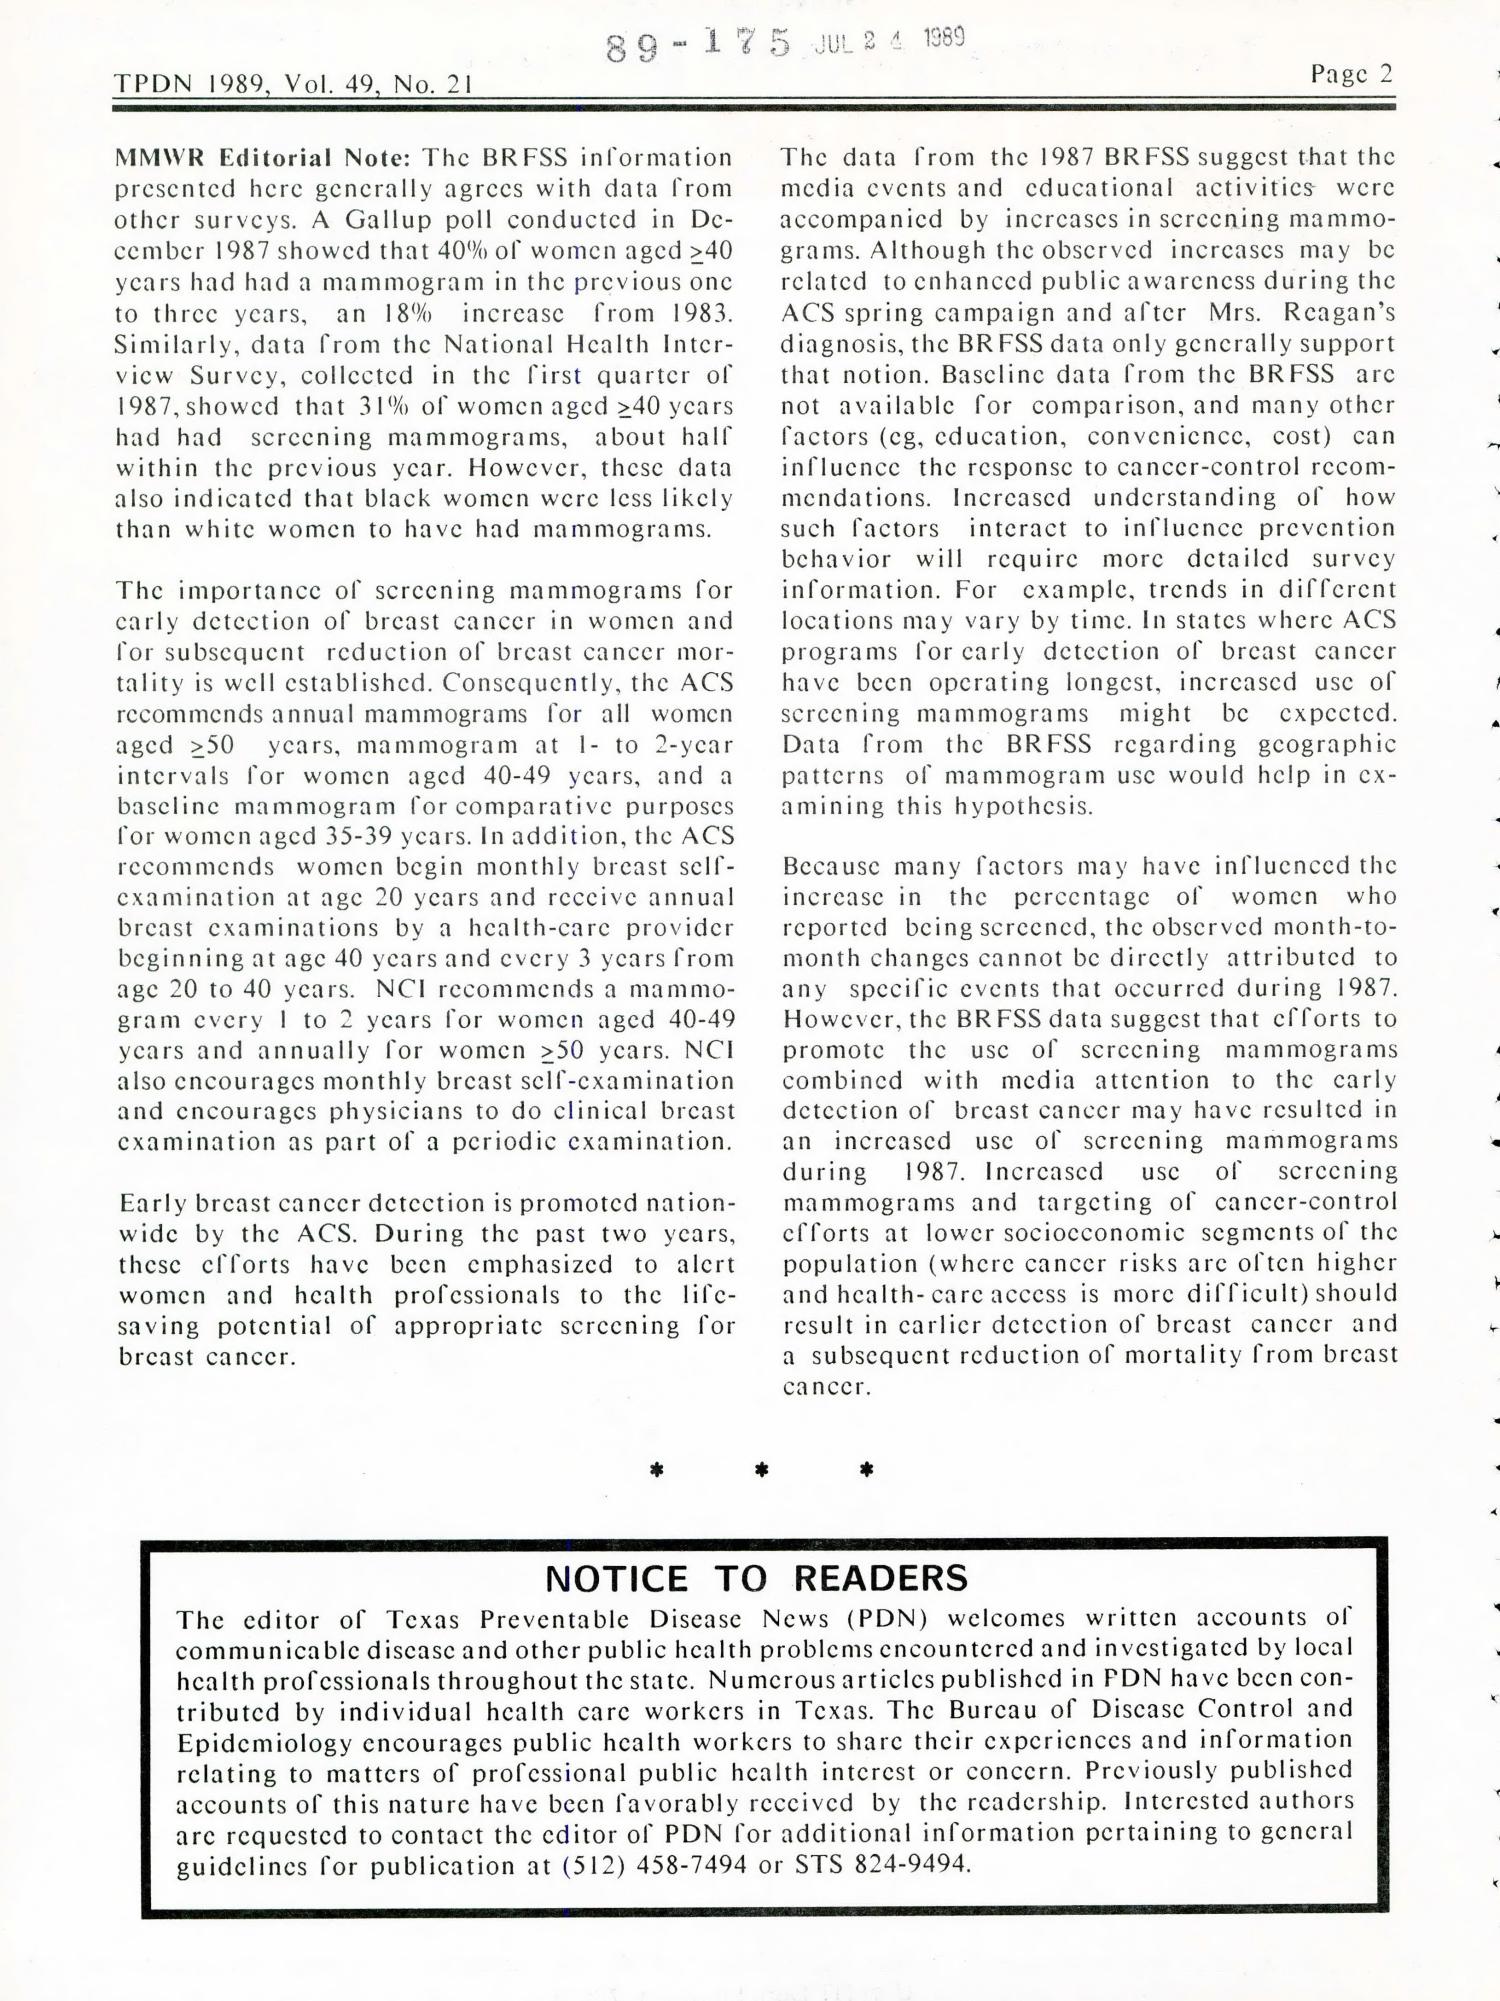 Texas Preventable Disease News, Volume 49, Number 21, May 27, 1989
                                                
                                                    PAGE2
                                                